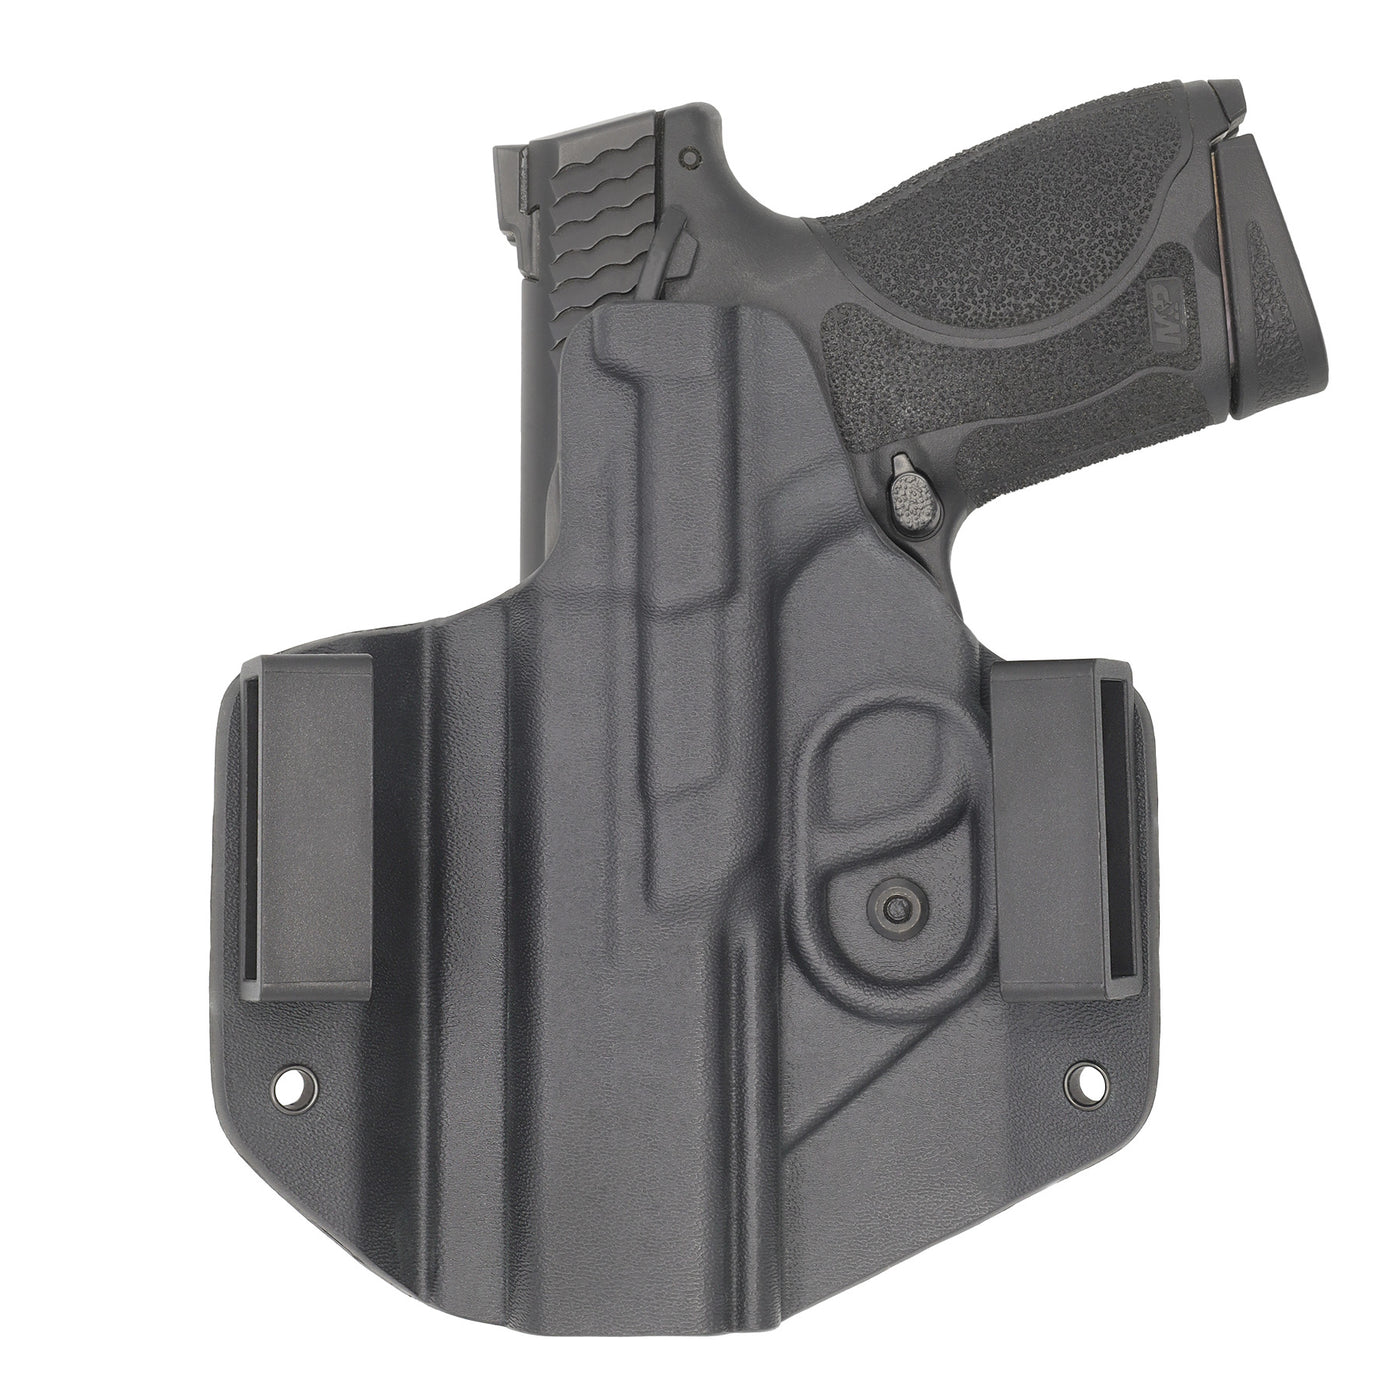 C&G Holsters quickship OWB Covert S&W M&P 10/45 4.6" in holstered position back view